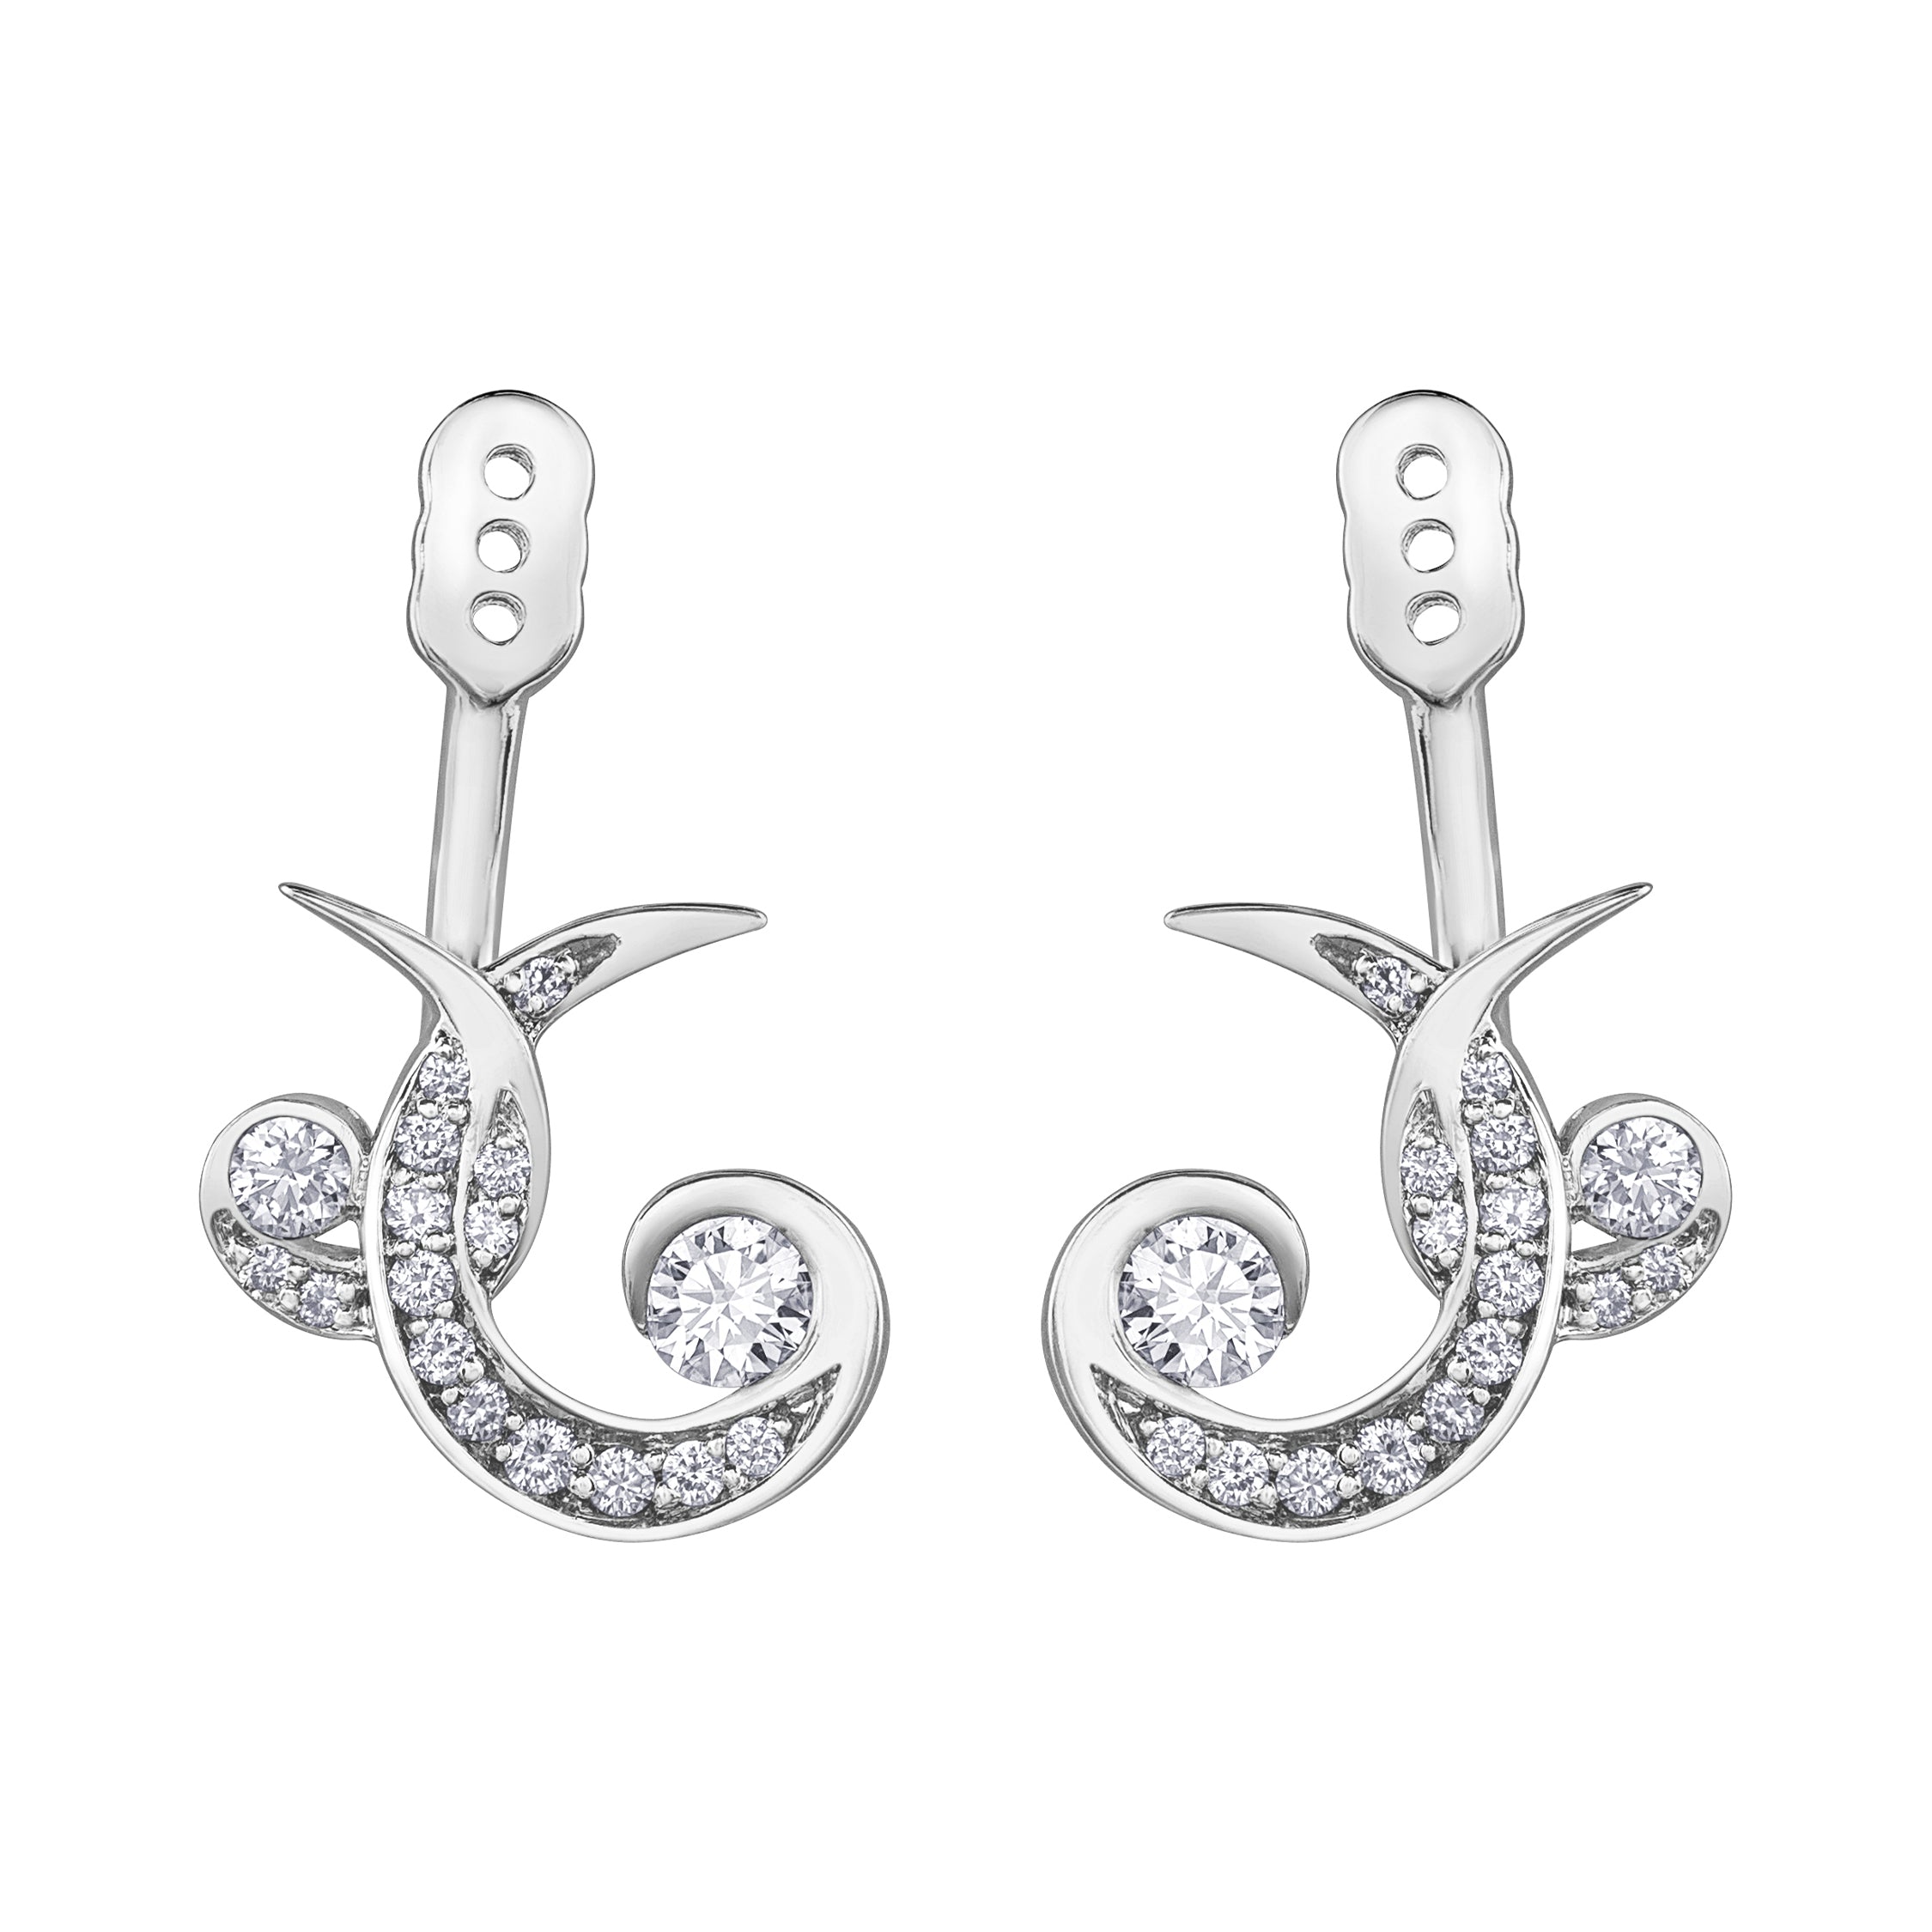 Crafted in 14KT white Canadian Certified Gold, these earring enhancers each feature a sprout-inspired shape set with round brilliant-cut Canadian diamonds.